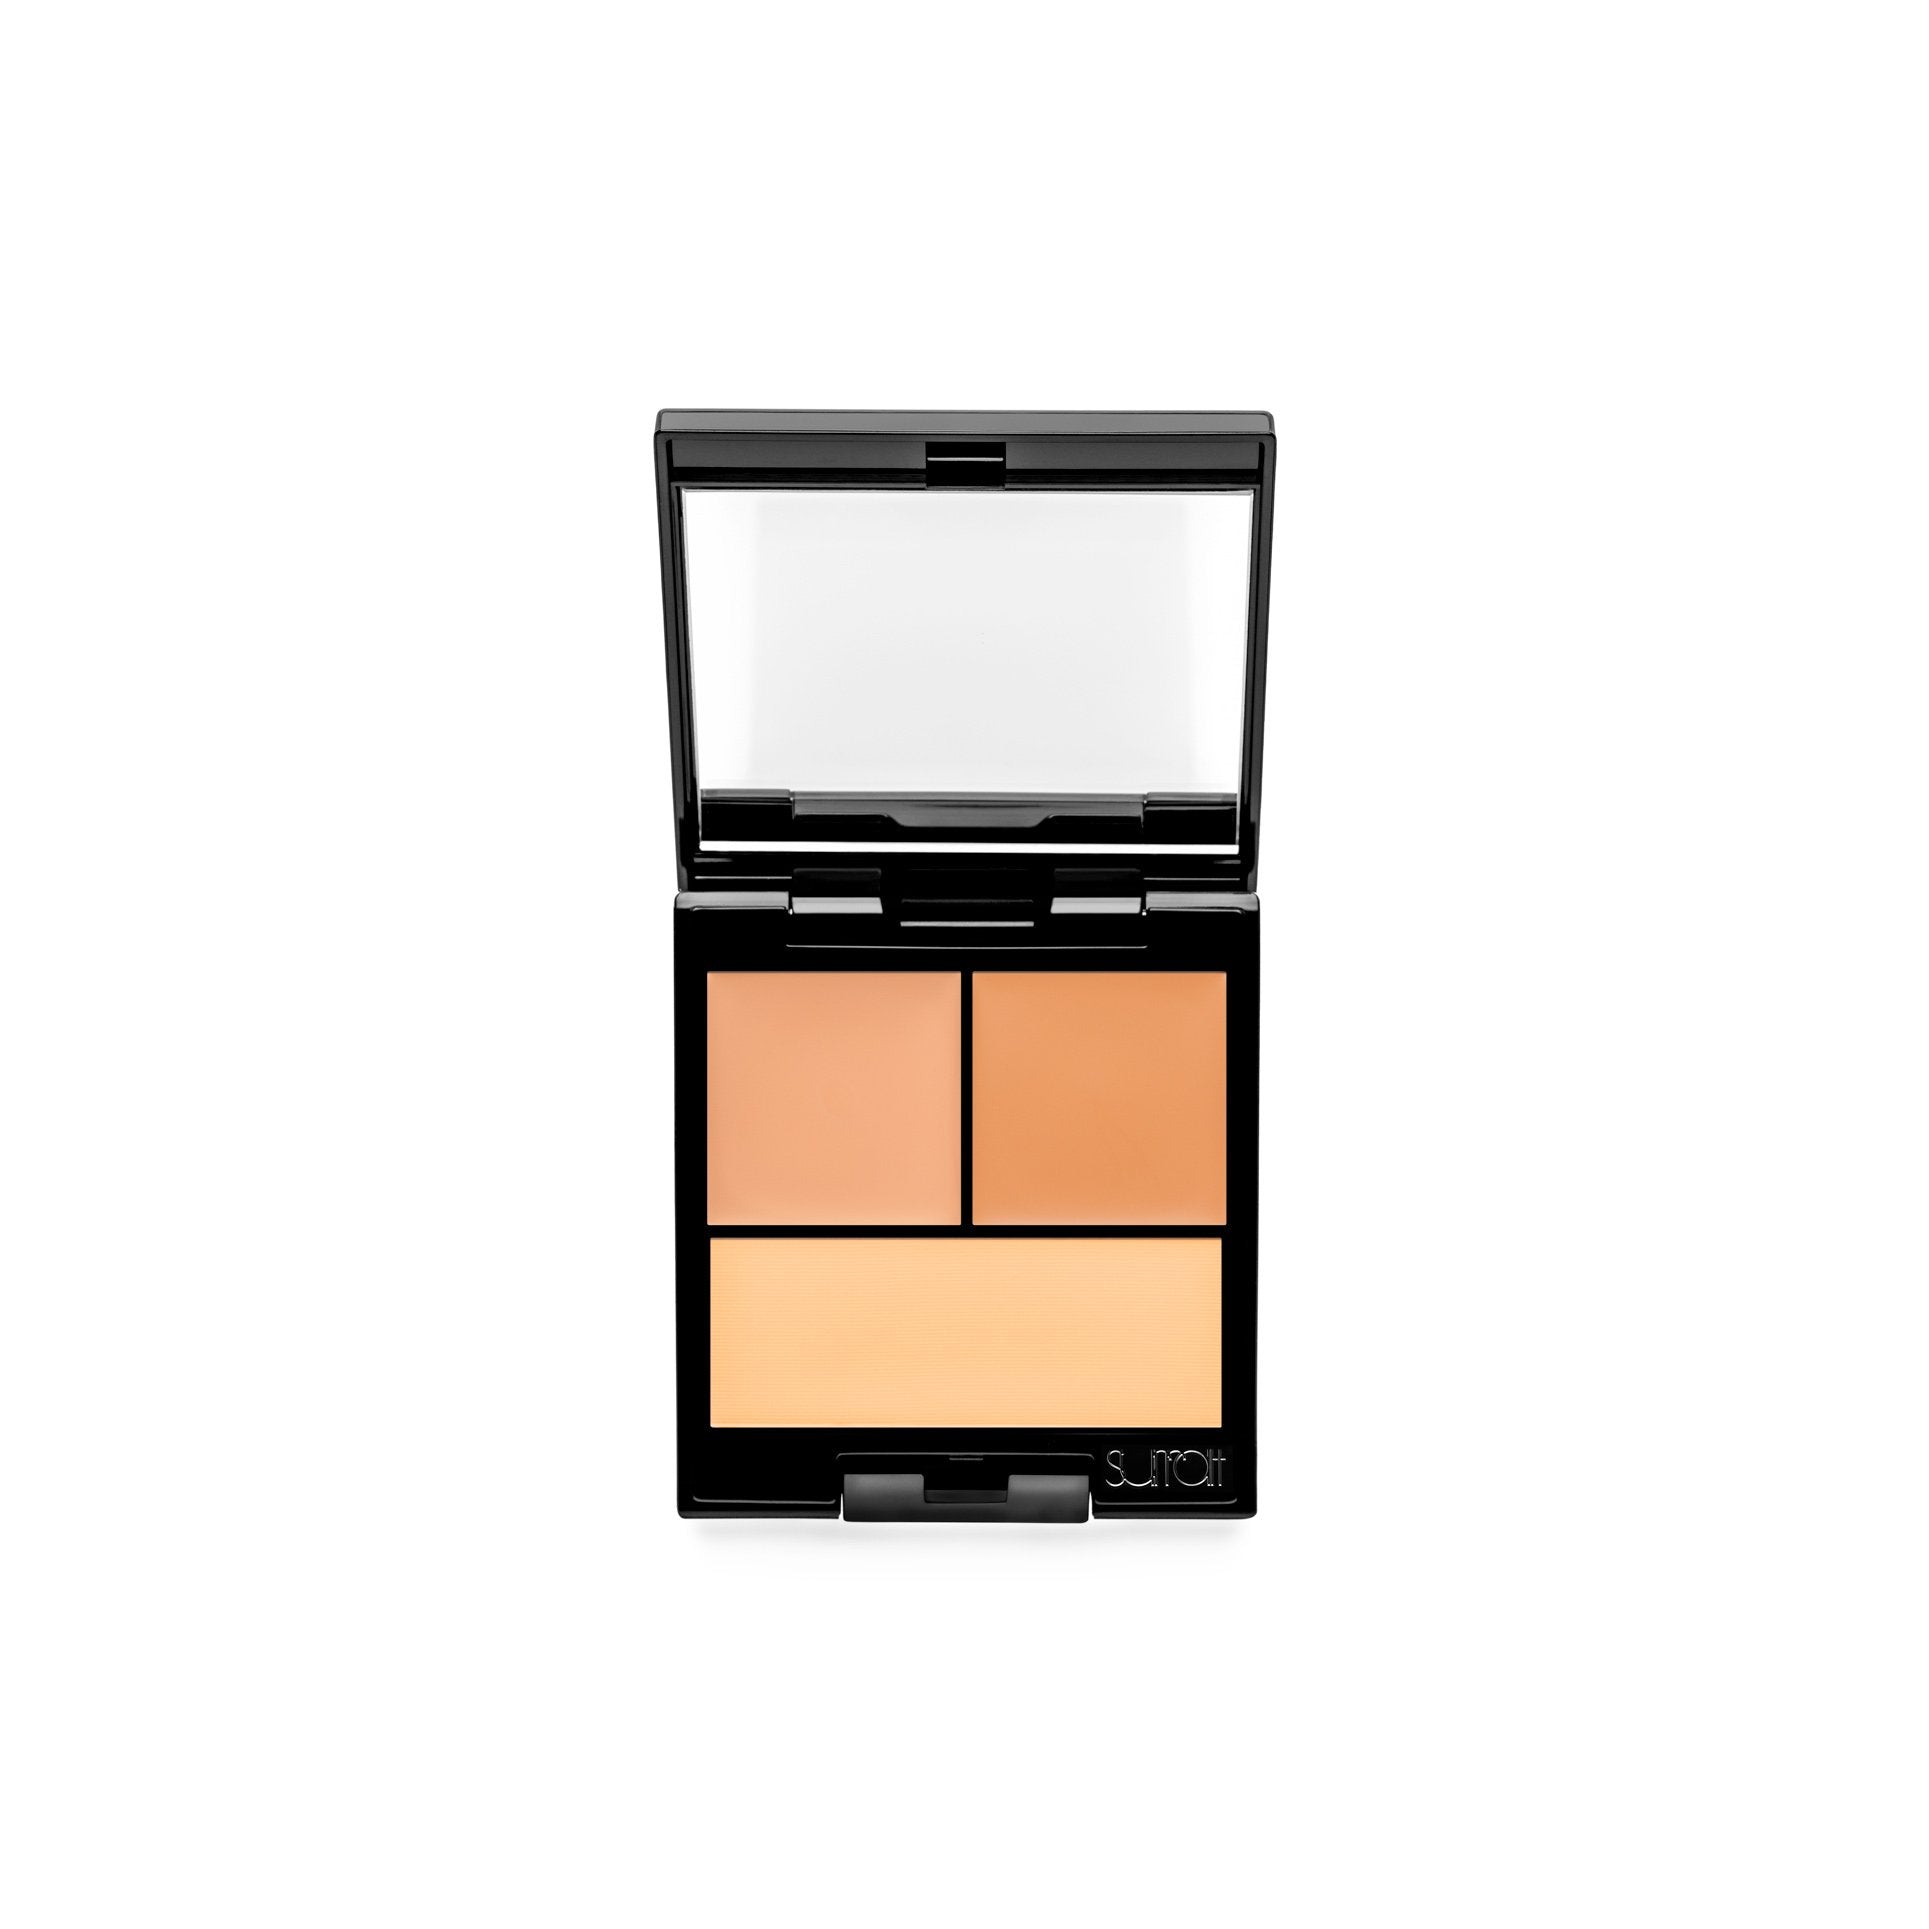 5 - Copper / Brown / Brown Powder - long-wearing tri-color cream concealer palette in copper and brown shades with brown setting powder